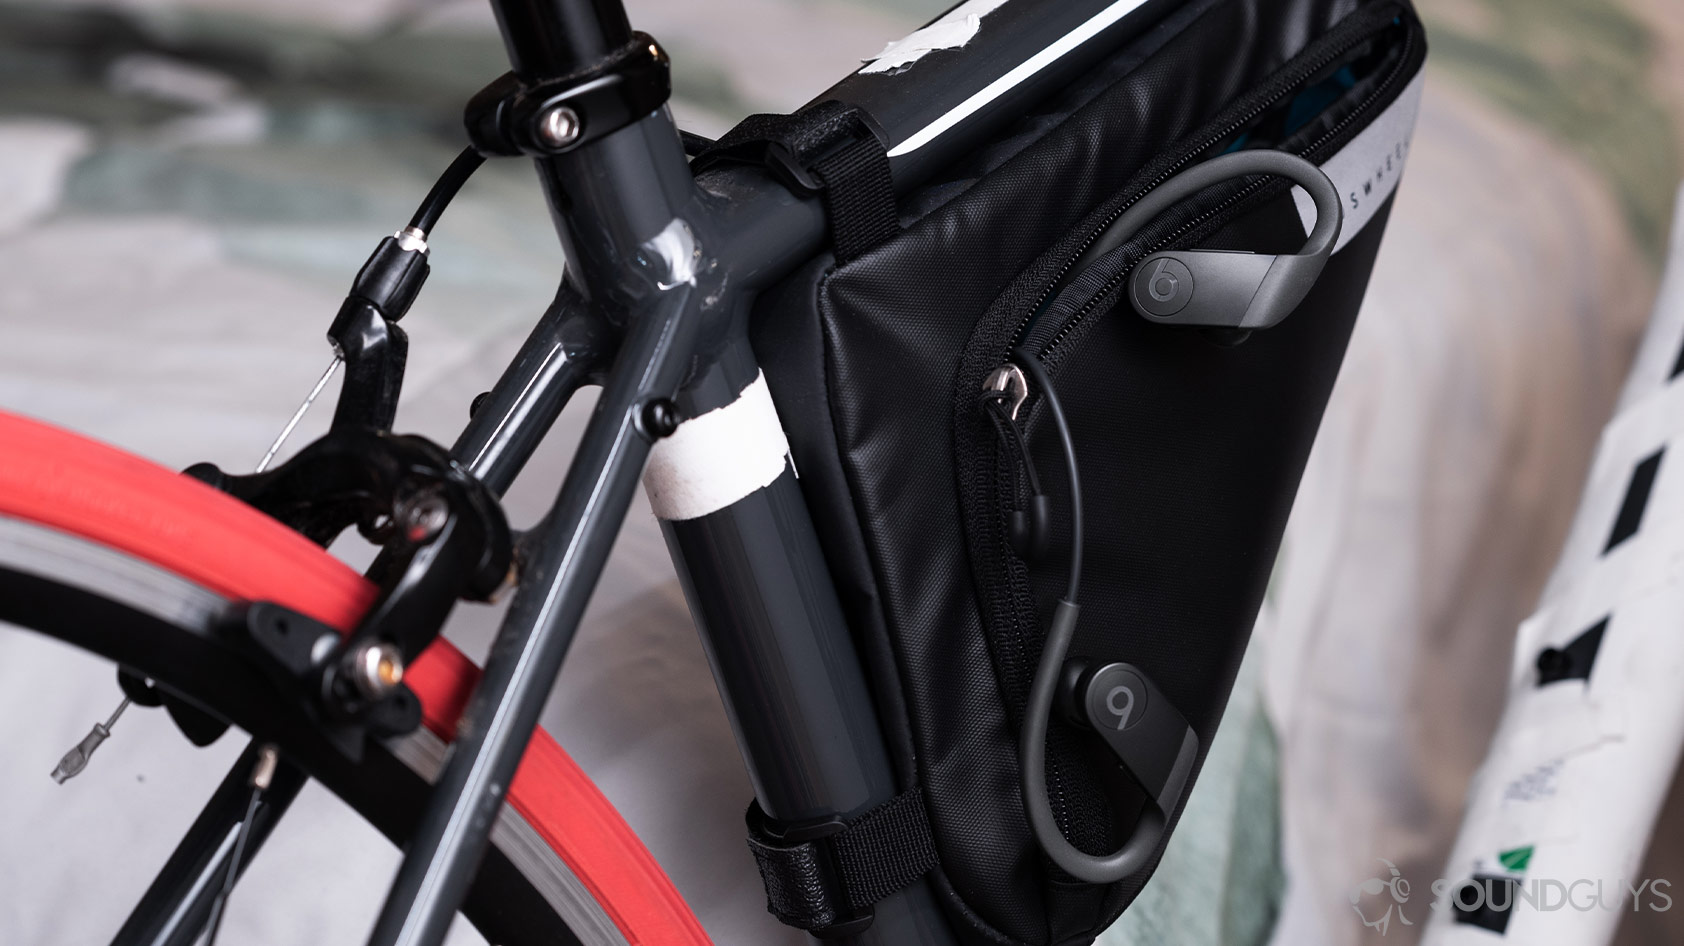 The Apple Beats Powerbeats workout earbuds emerging from a cycling carrying pouch attached to a road bike.